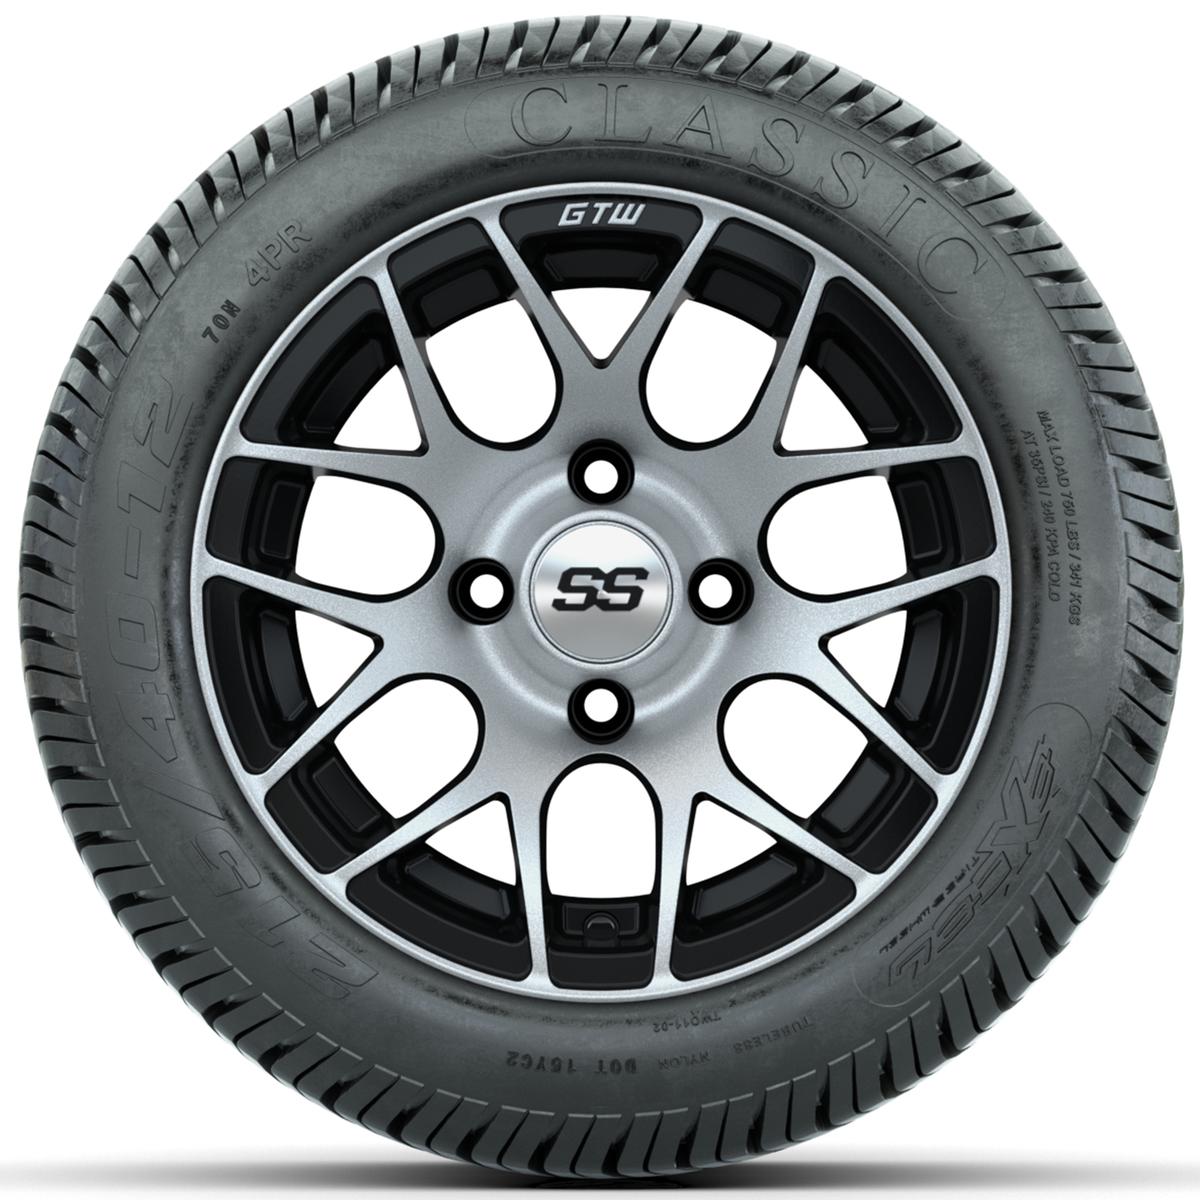 Set of (4) 12 in GTW Pursuit Wheels with 215/40-12 Excel Classic Street Tires